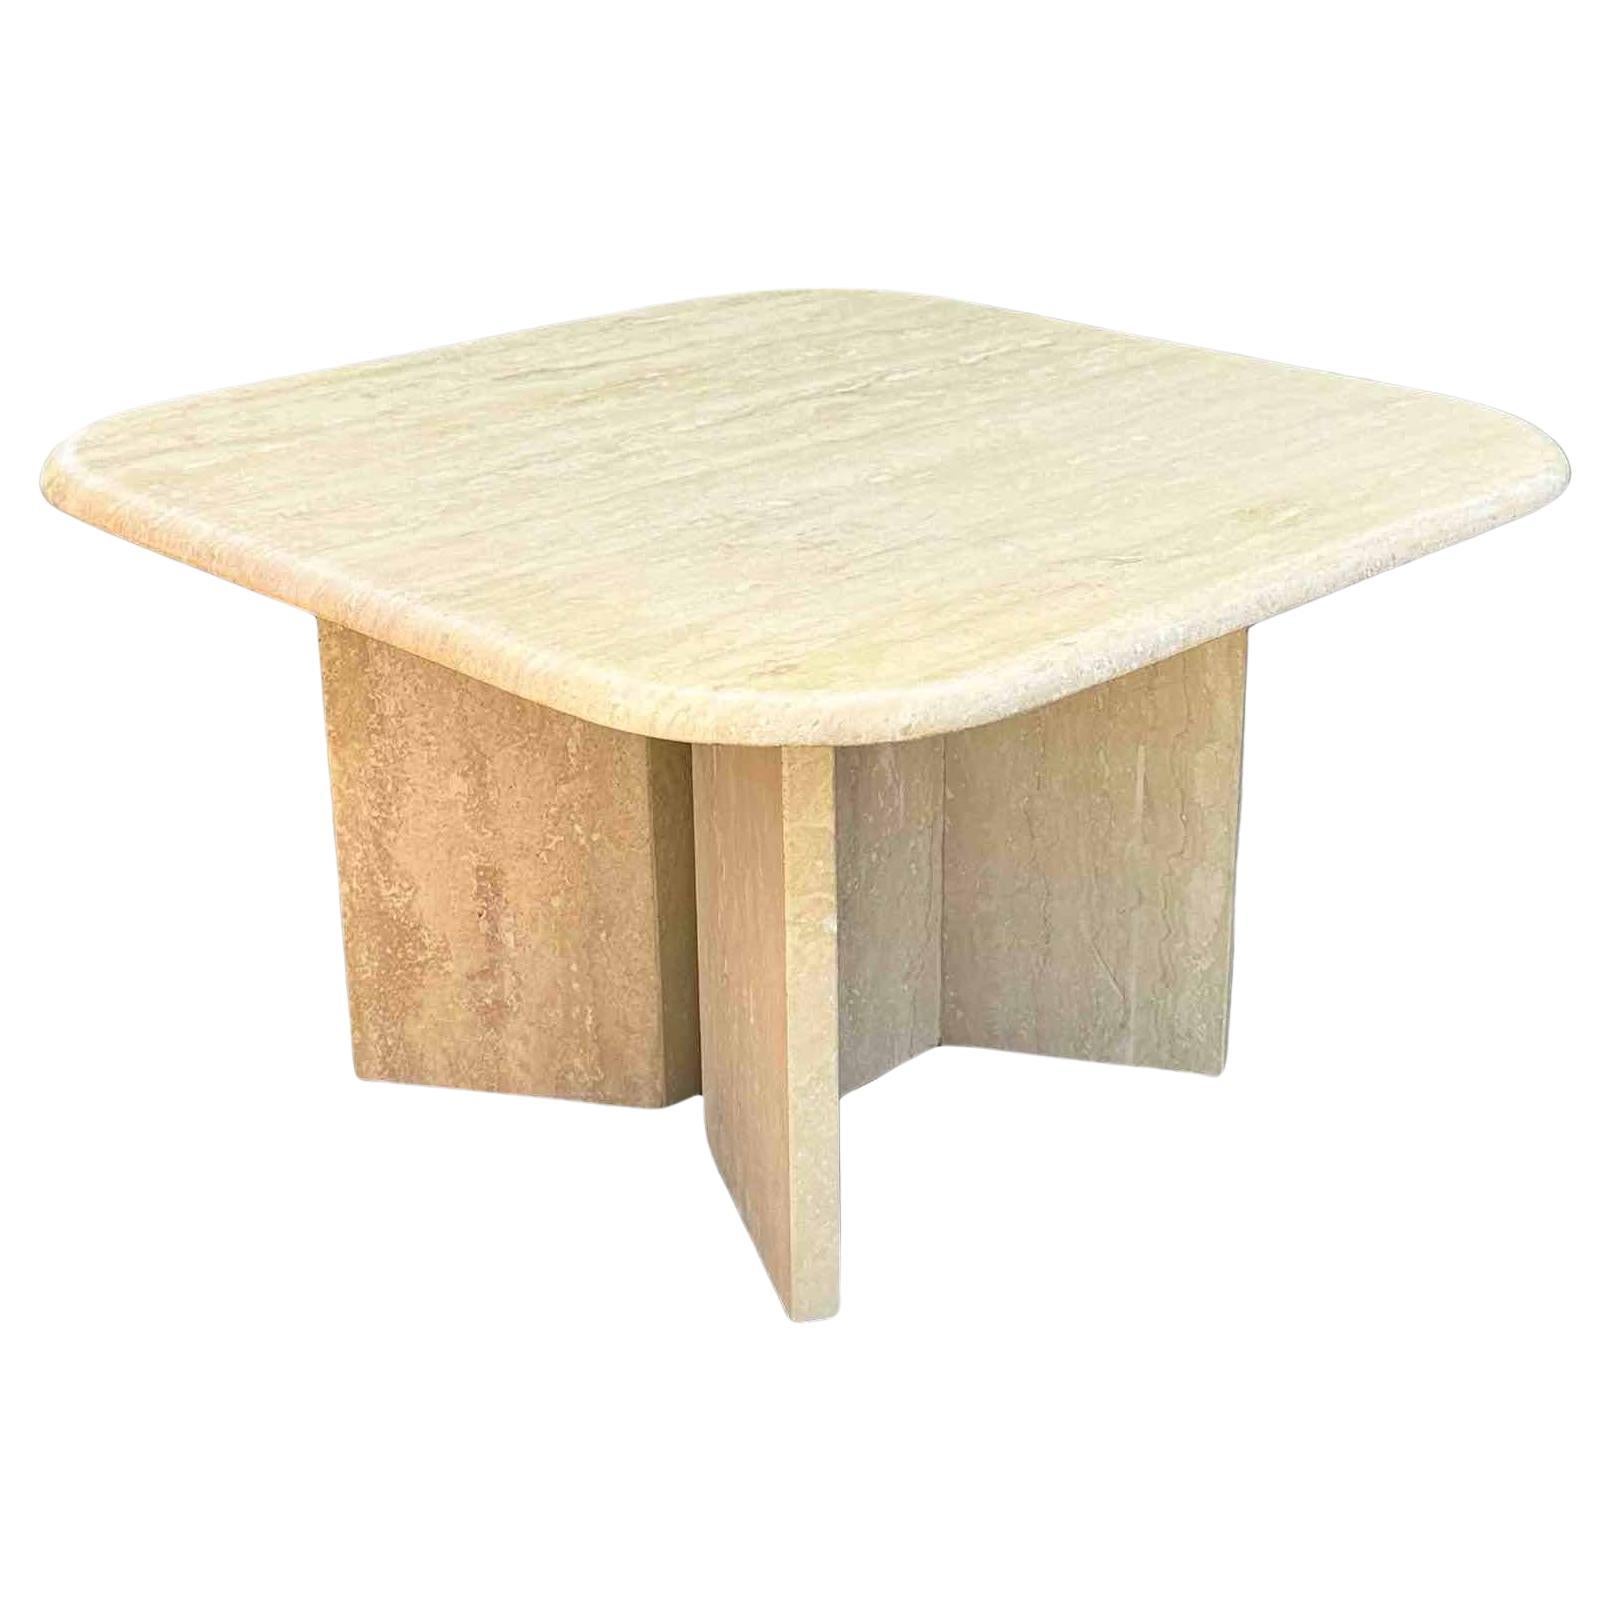 Square Travertine Coffee Table with Rounded Corners, Italy, 1970 For Sale